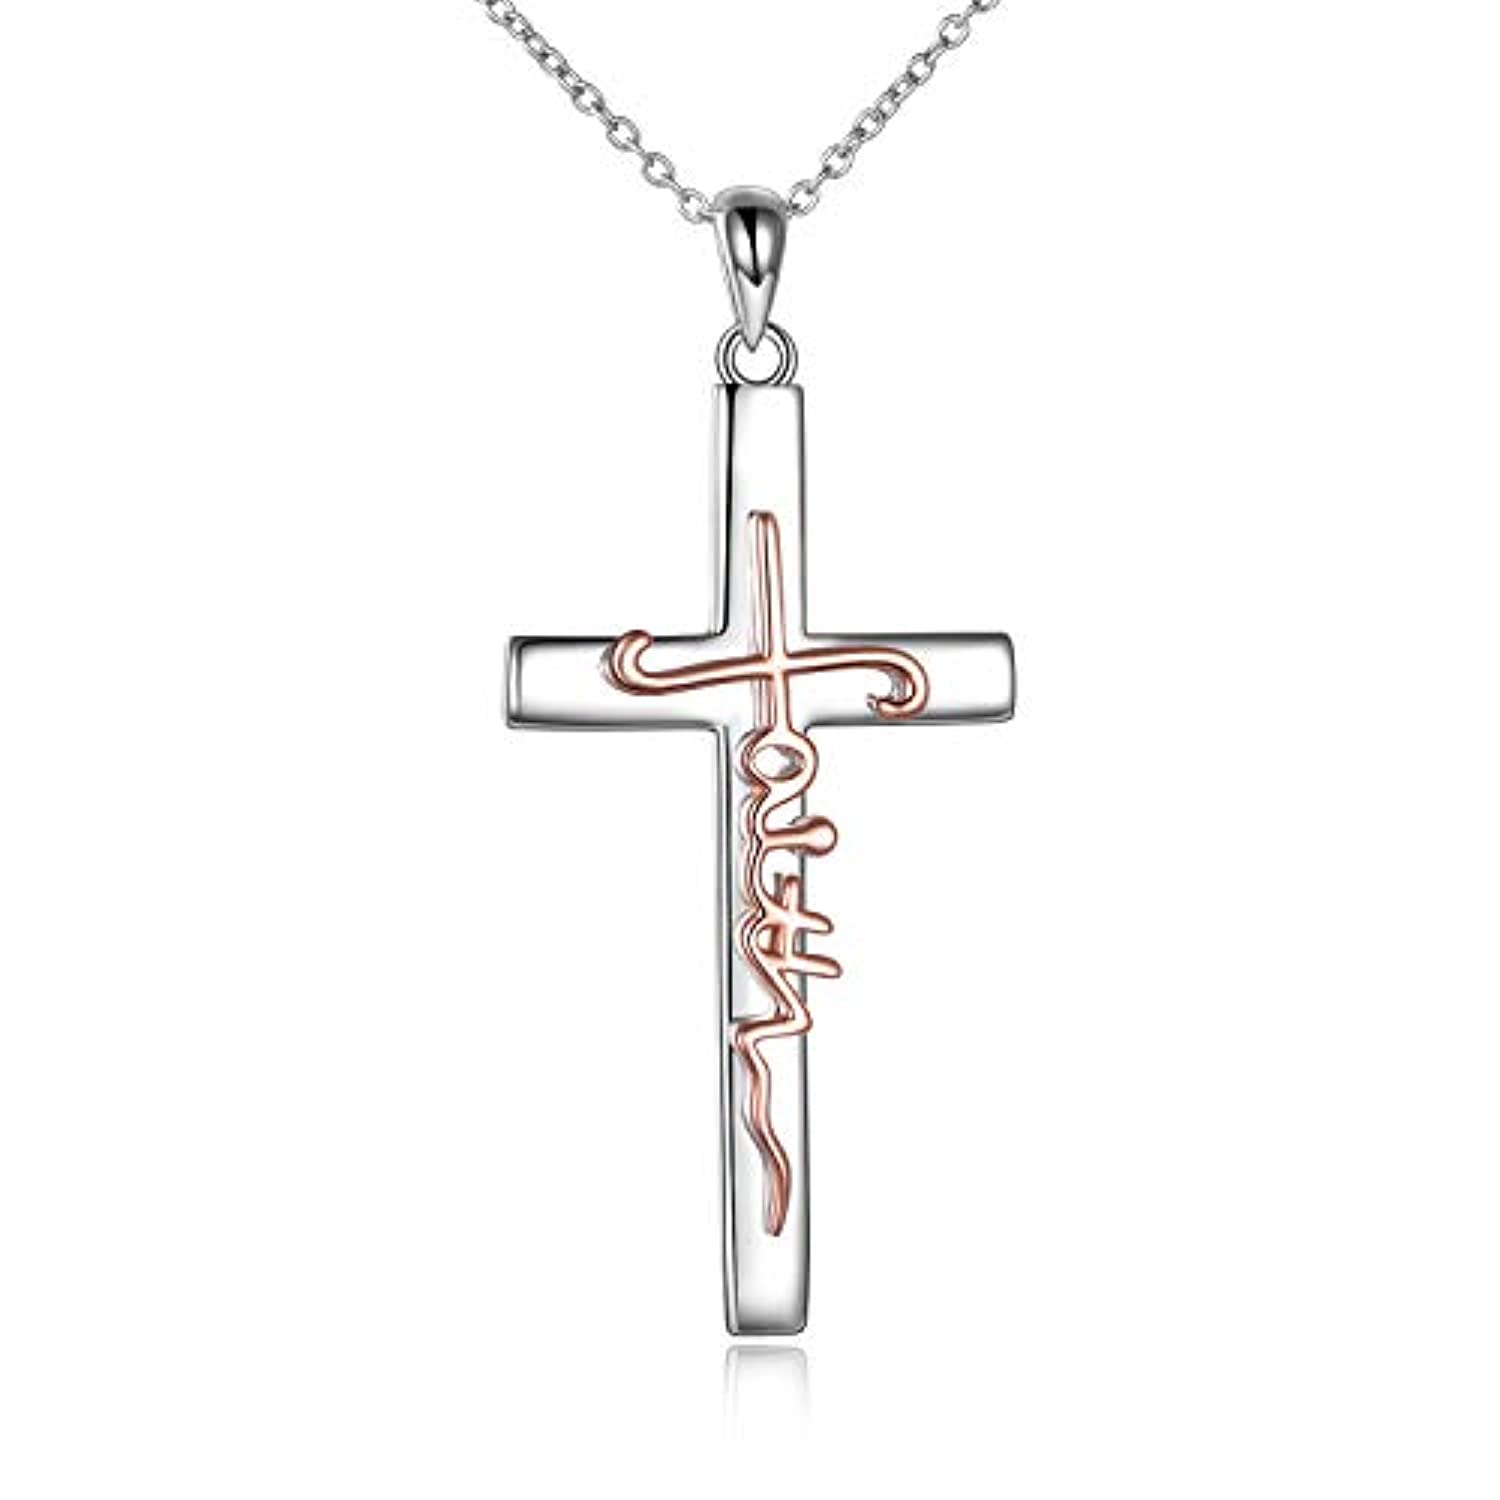 Girls Infinity Cross Necklace | maurices